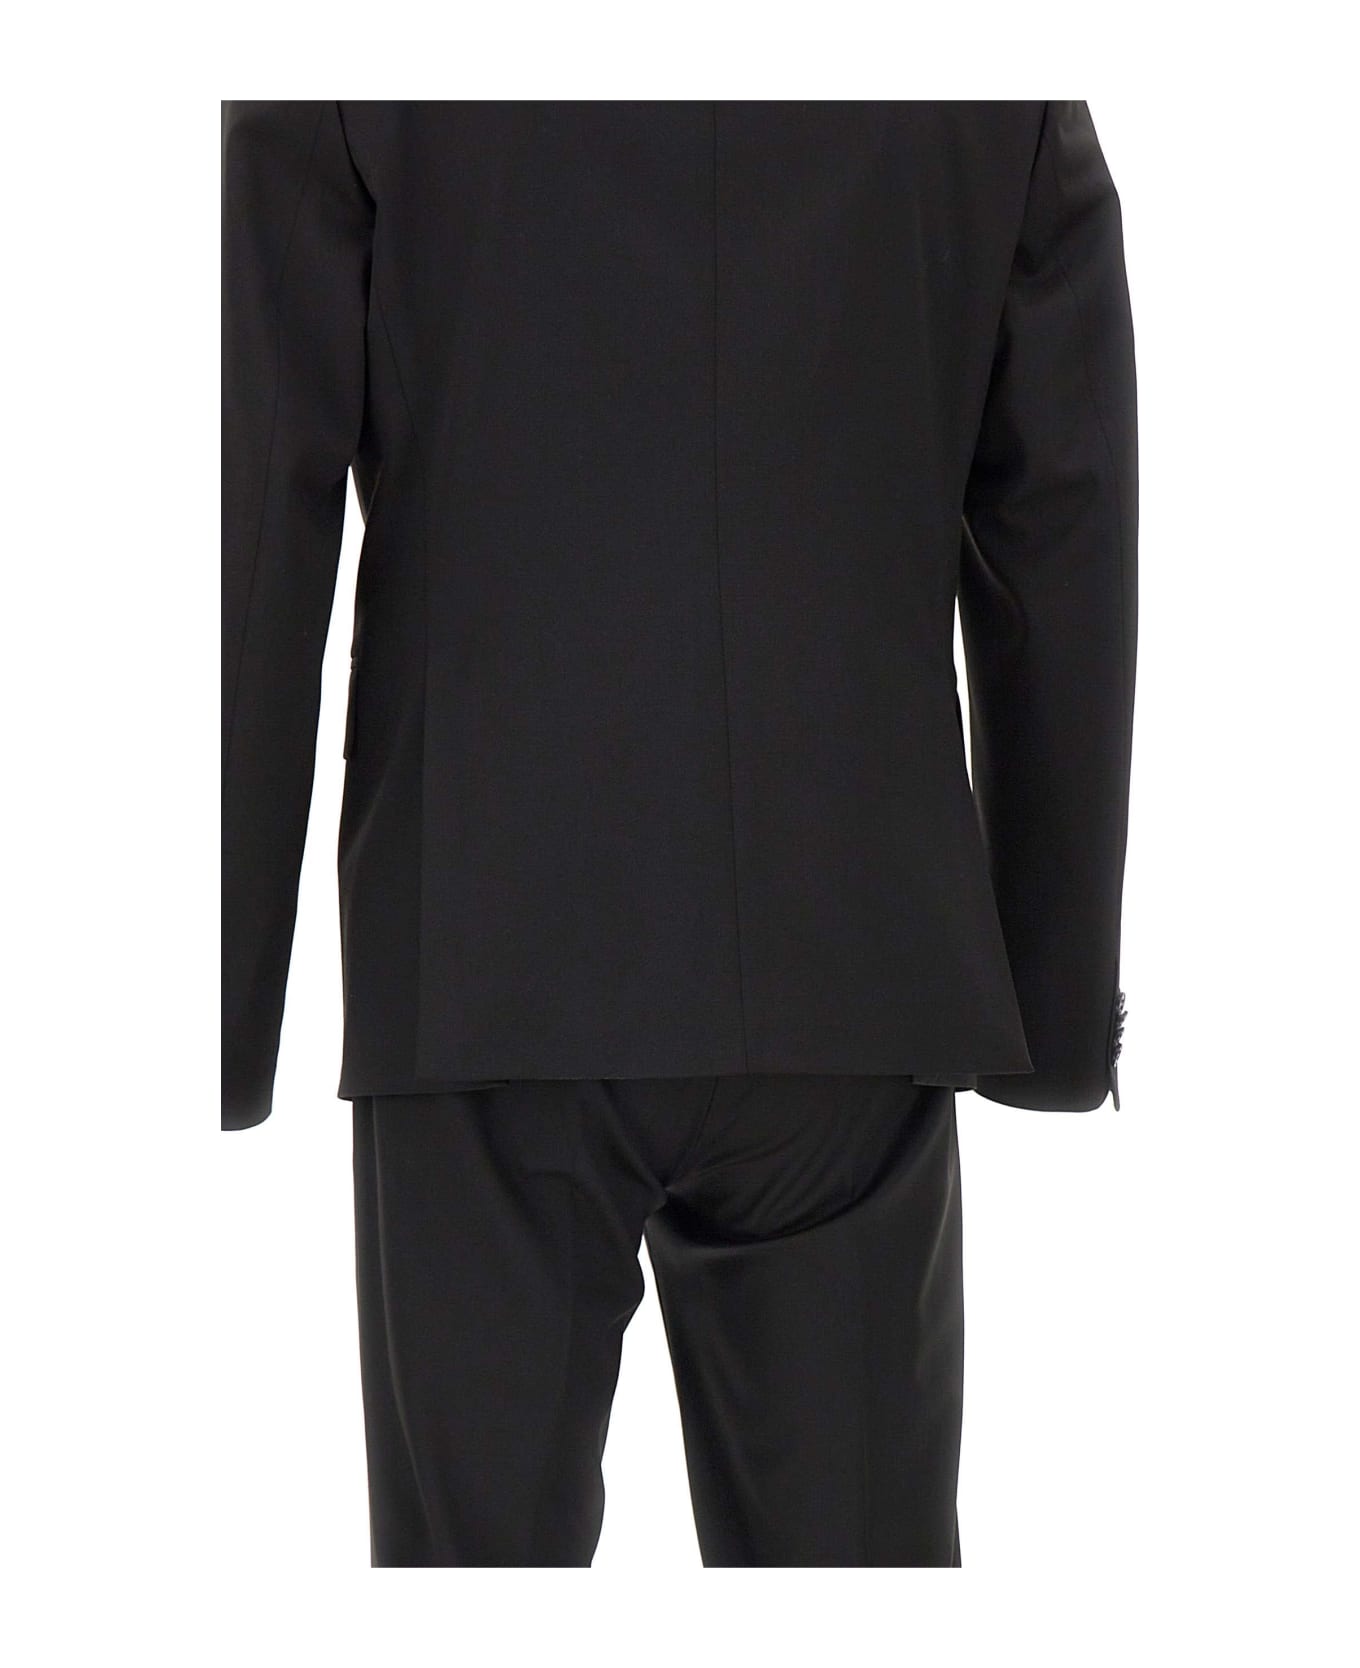 Brian Dales "ga87" Suit Two-piece Cool Wool - BLACK